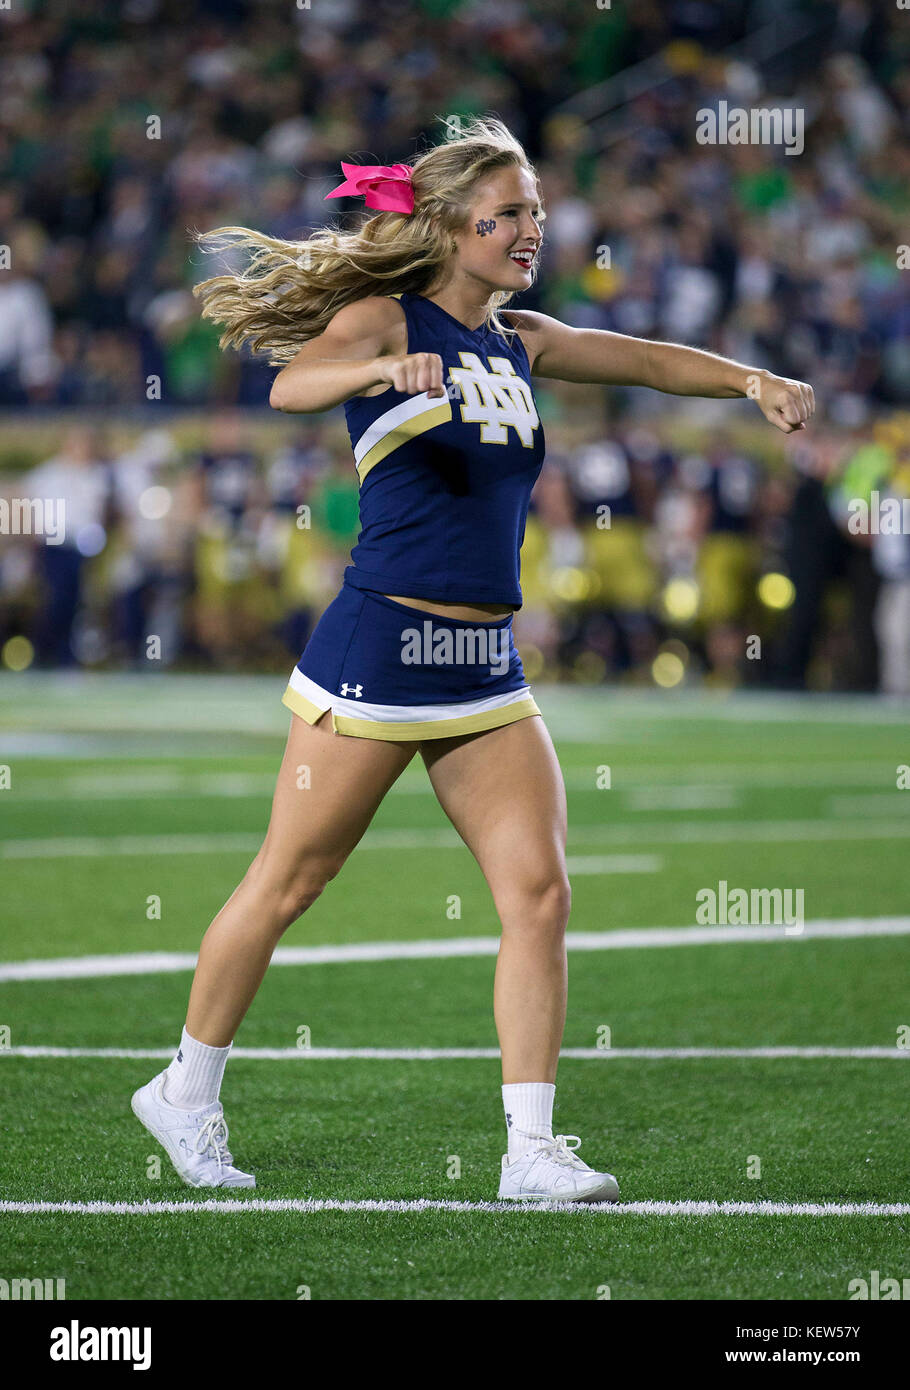 October 21, 2017: Notre Dame cheerleader performs during NCAA football game action between the USC Trojans and the Notre Dame Fighting Irish at Notre Dame Stadium in South Bend, Indiana. Notre Dame defeated USC 49-14. John Mersits/CSM. Stock Photo